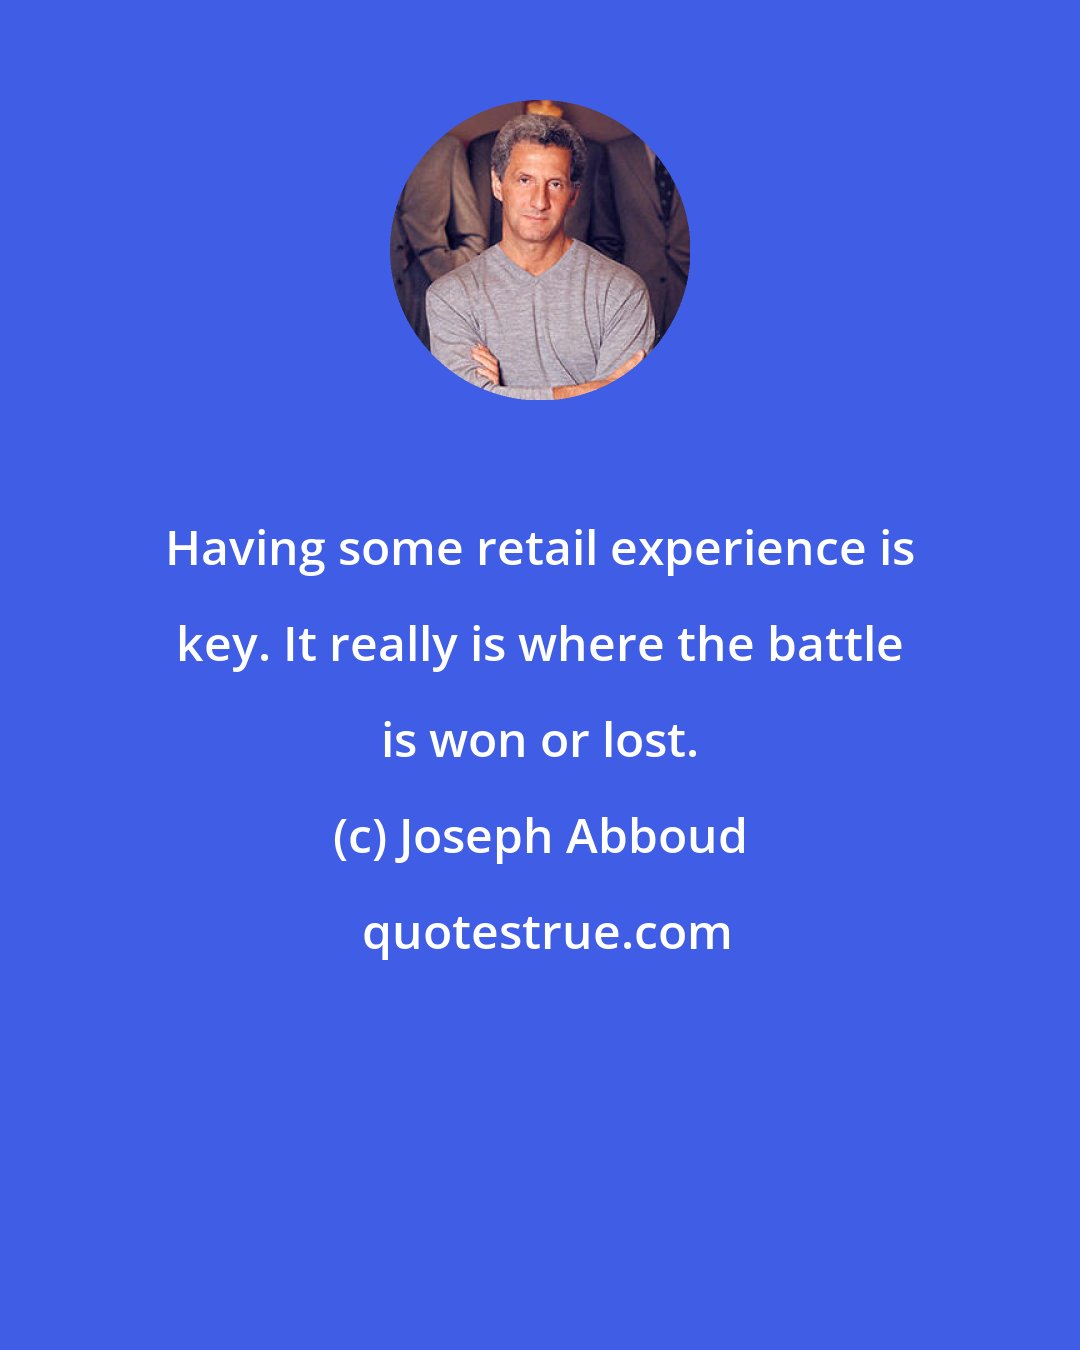 Joseph Abboud: Having some retail experience is key. It really is where the battle is won or lost.